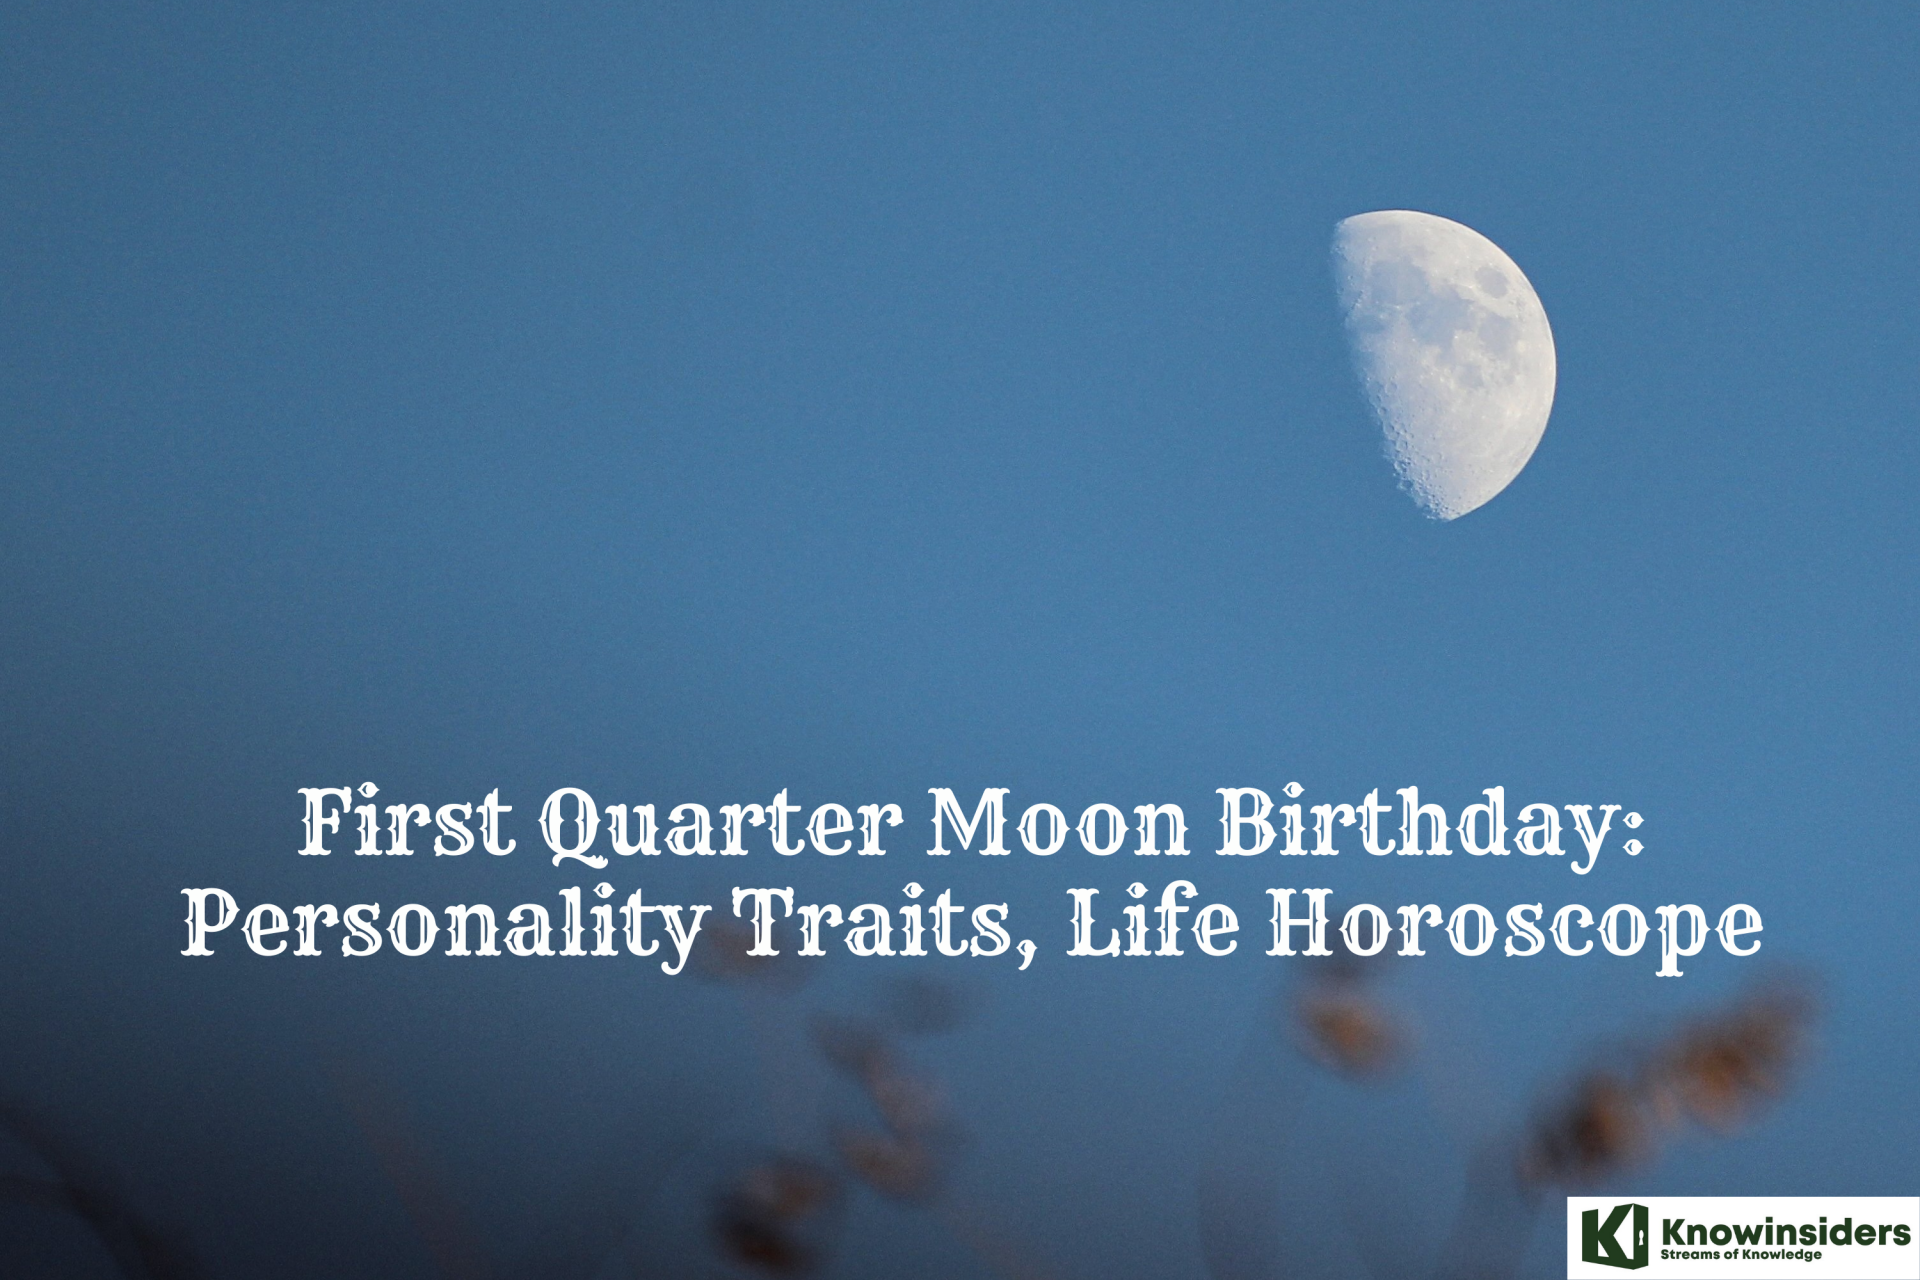 First Quarter Moon Birthday: Personality Traits, Life Horoscope - Prediction for Your Destiny